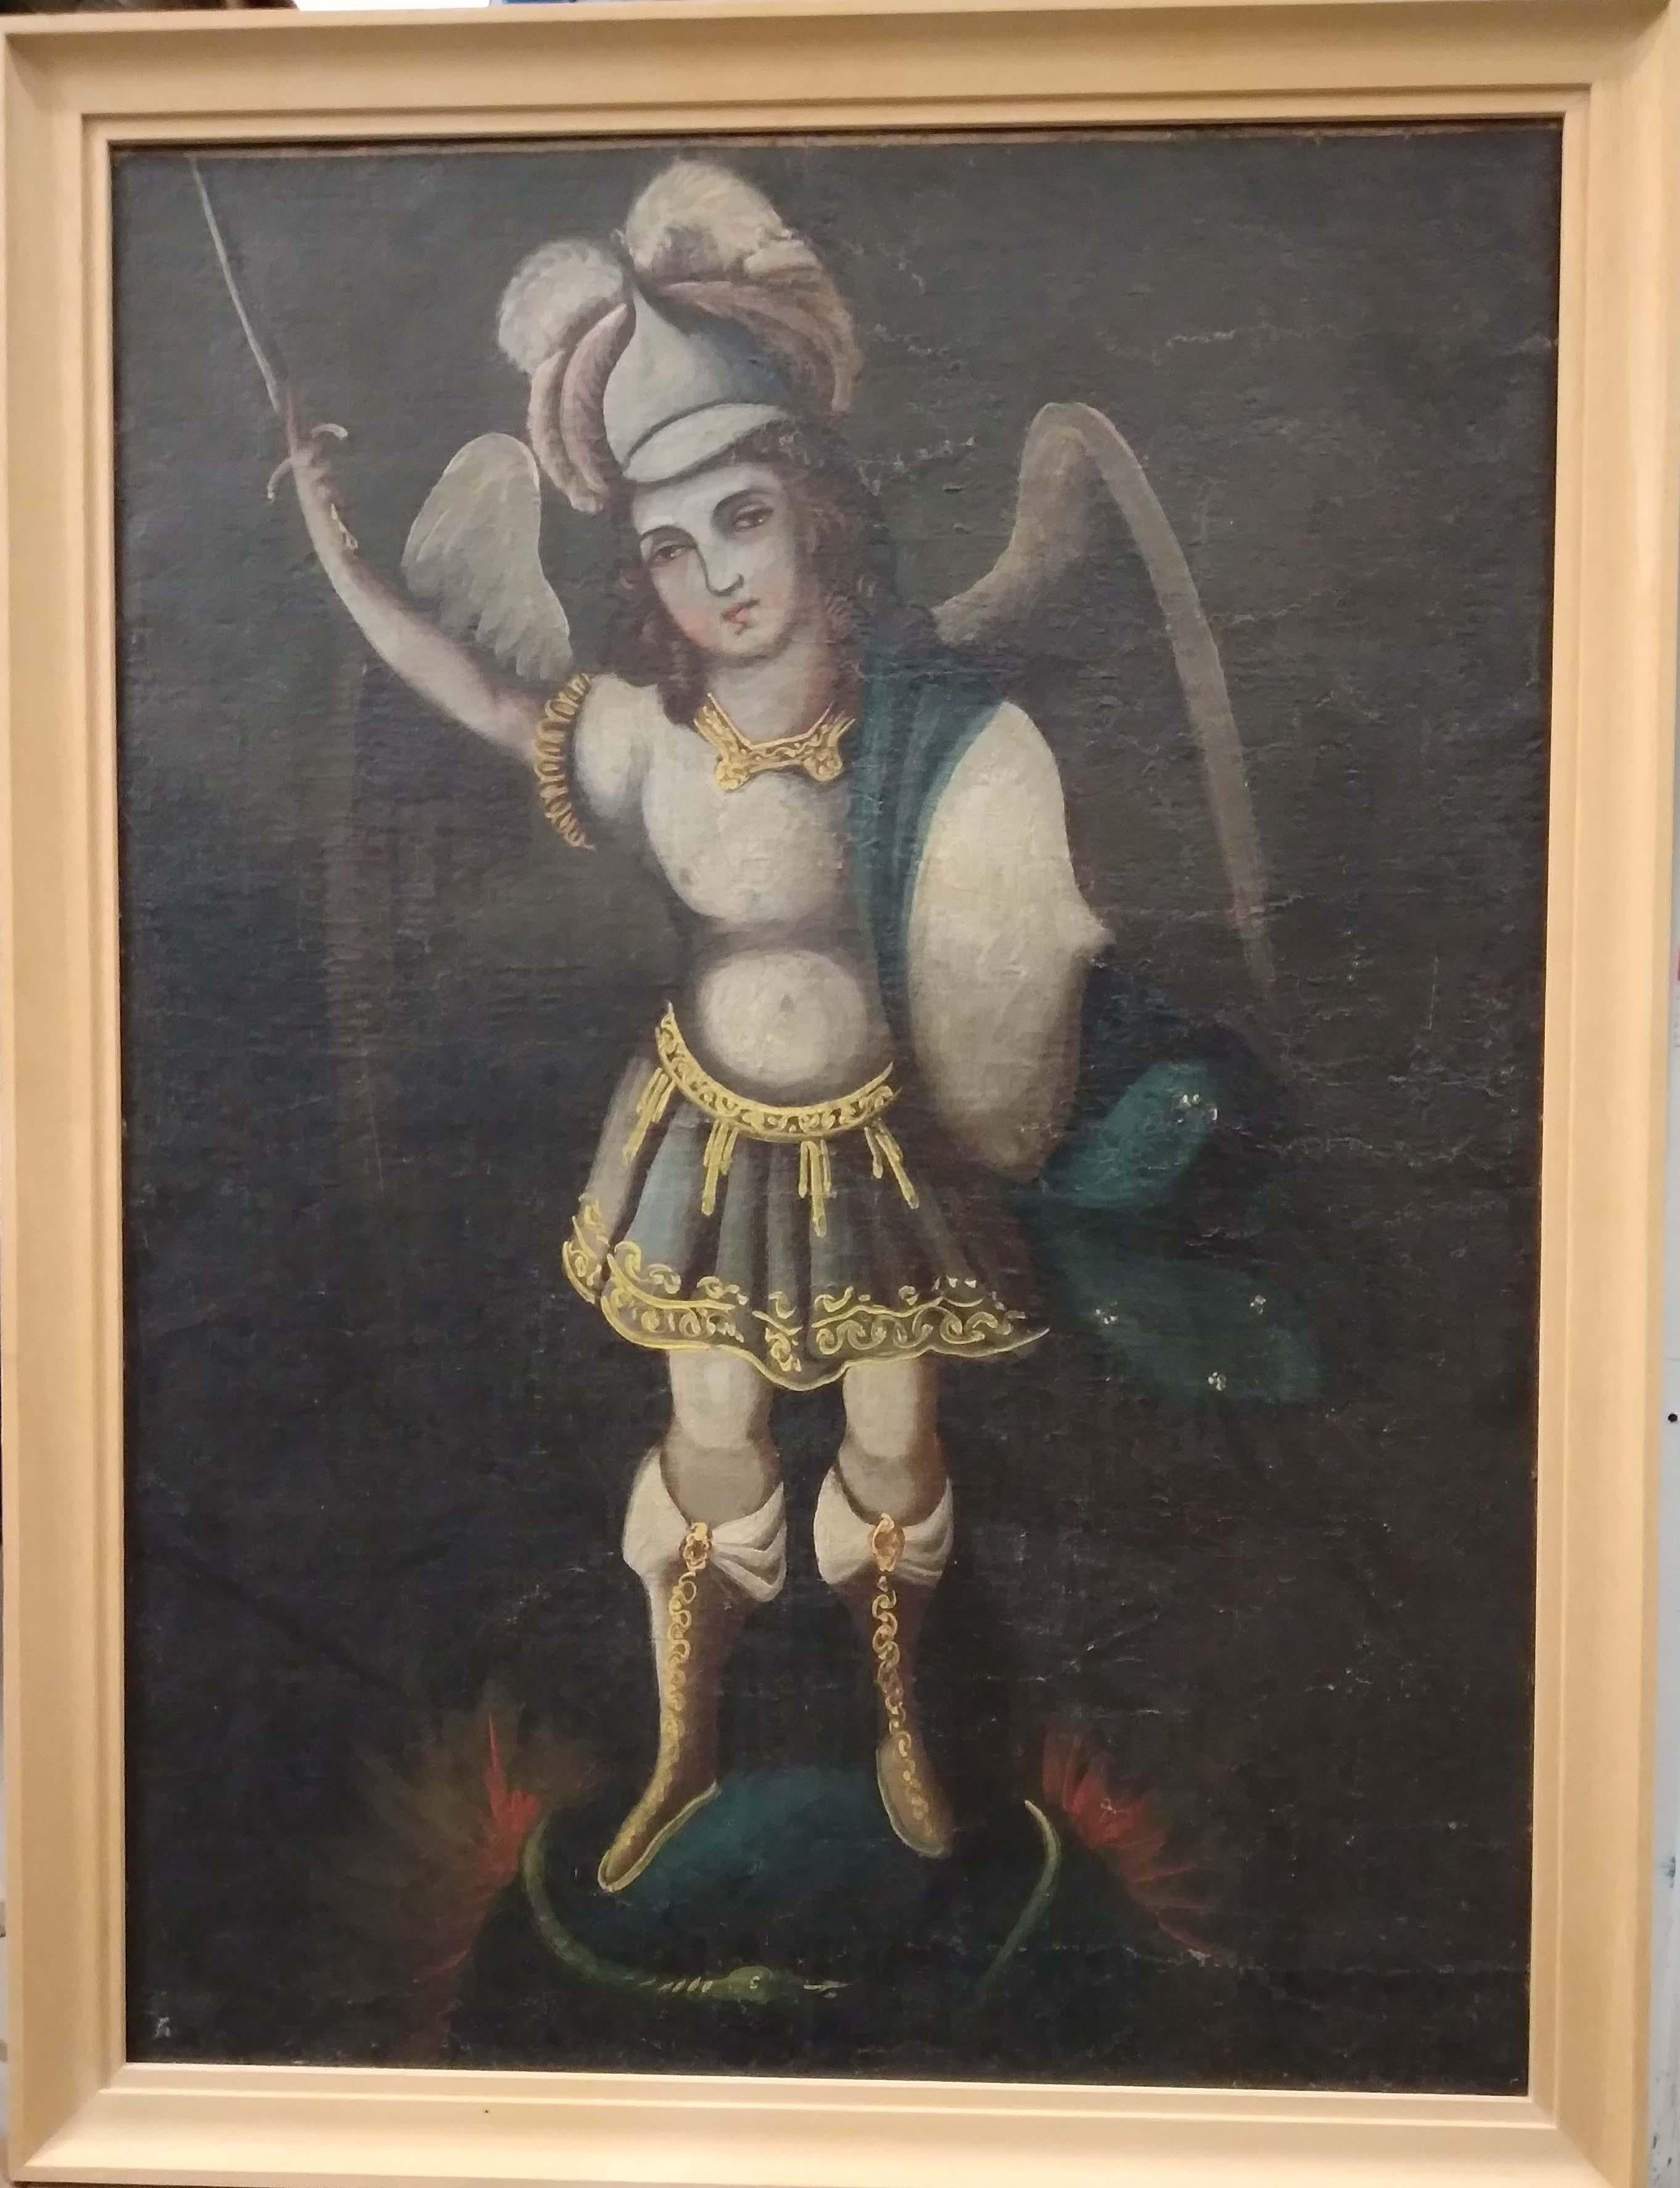 A fine 19th century full length portrait of St Michael standing with his sword raised.
South American Cuzco school 19th century and earlier.
Unsigned
Oil on canvas, 56 by 78cms. Framed overall size 66 x 84 approx.
Condition Canvas relined some